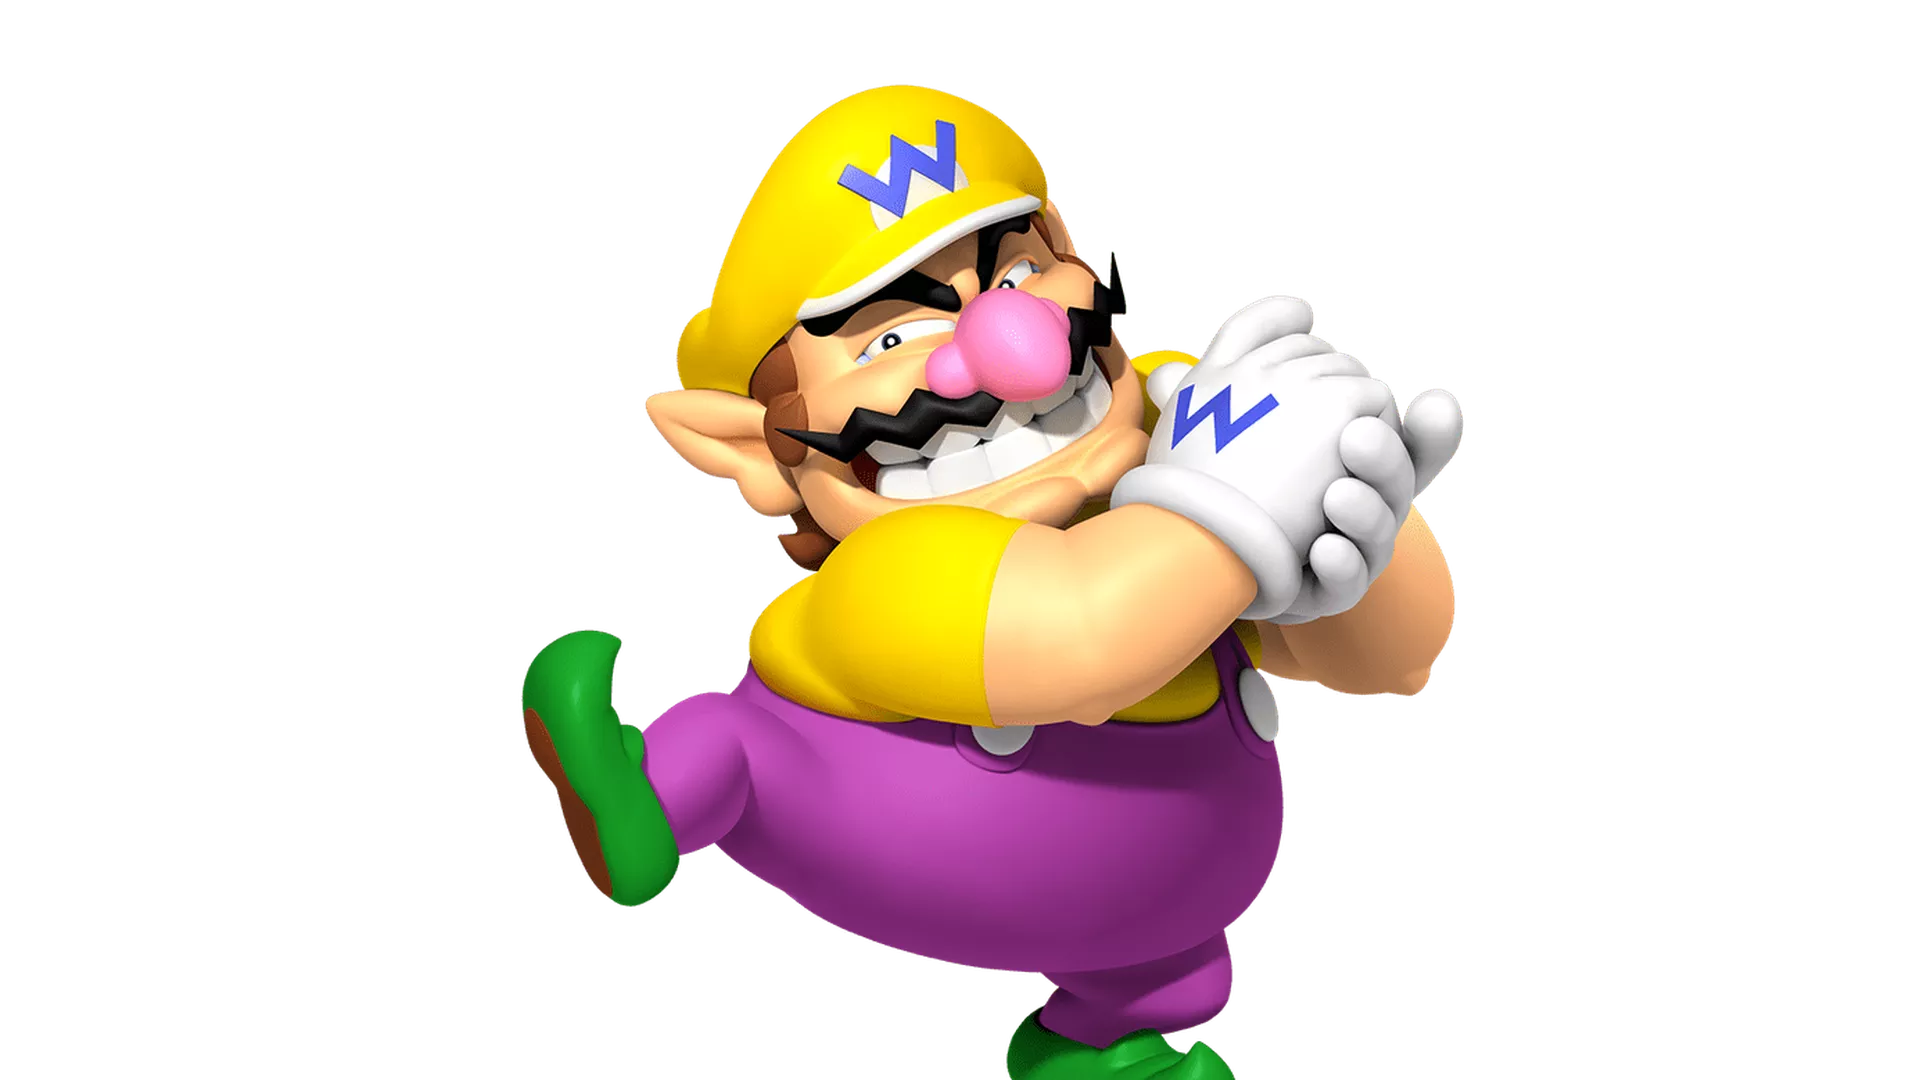 Wario64 Now Helping Find Covid Tests In Addition To PS5s